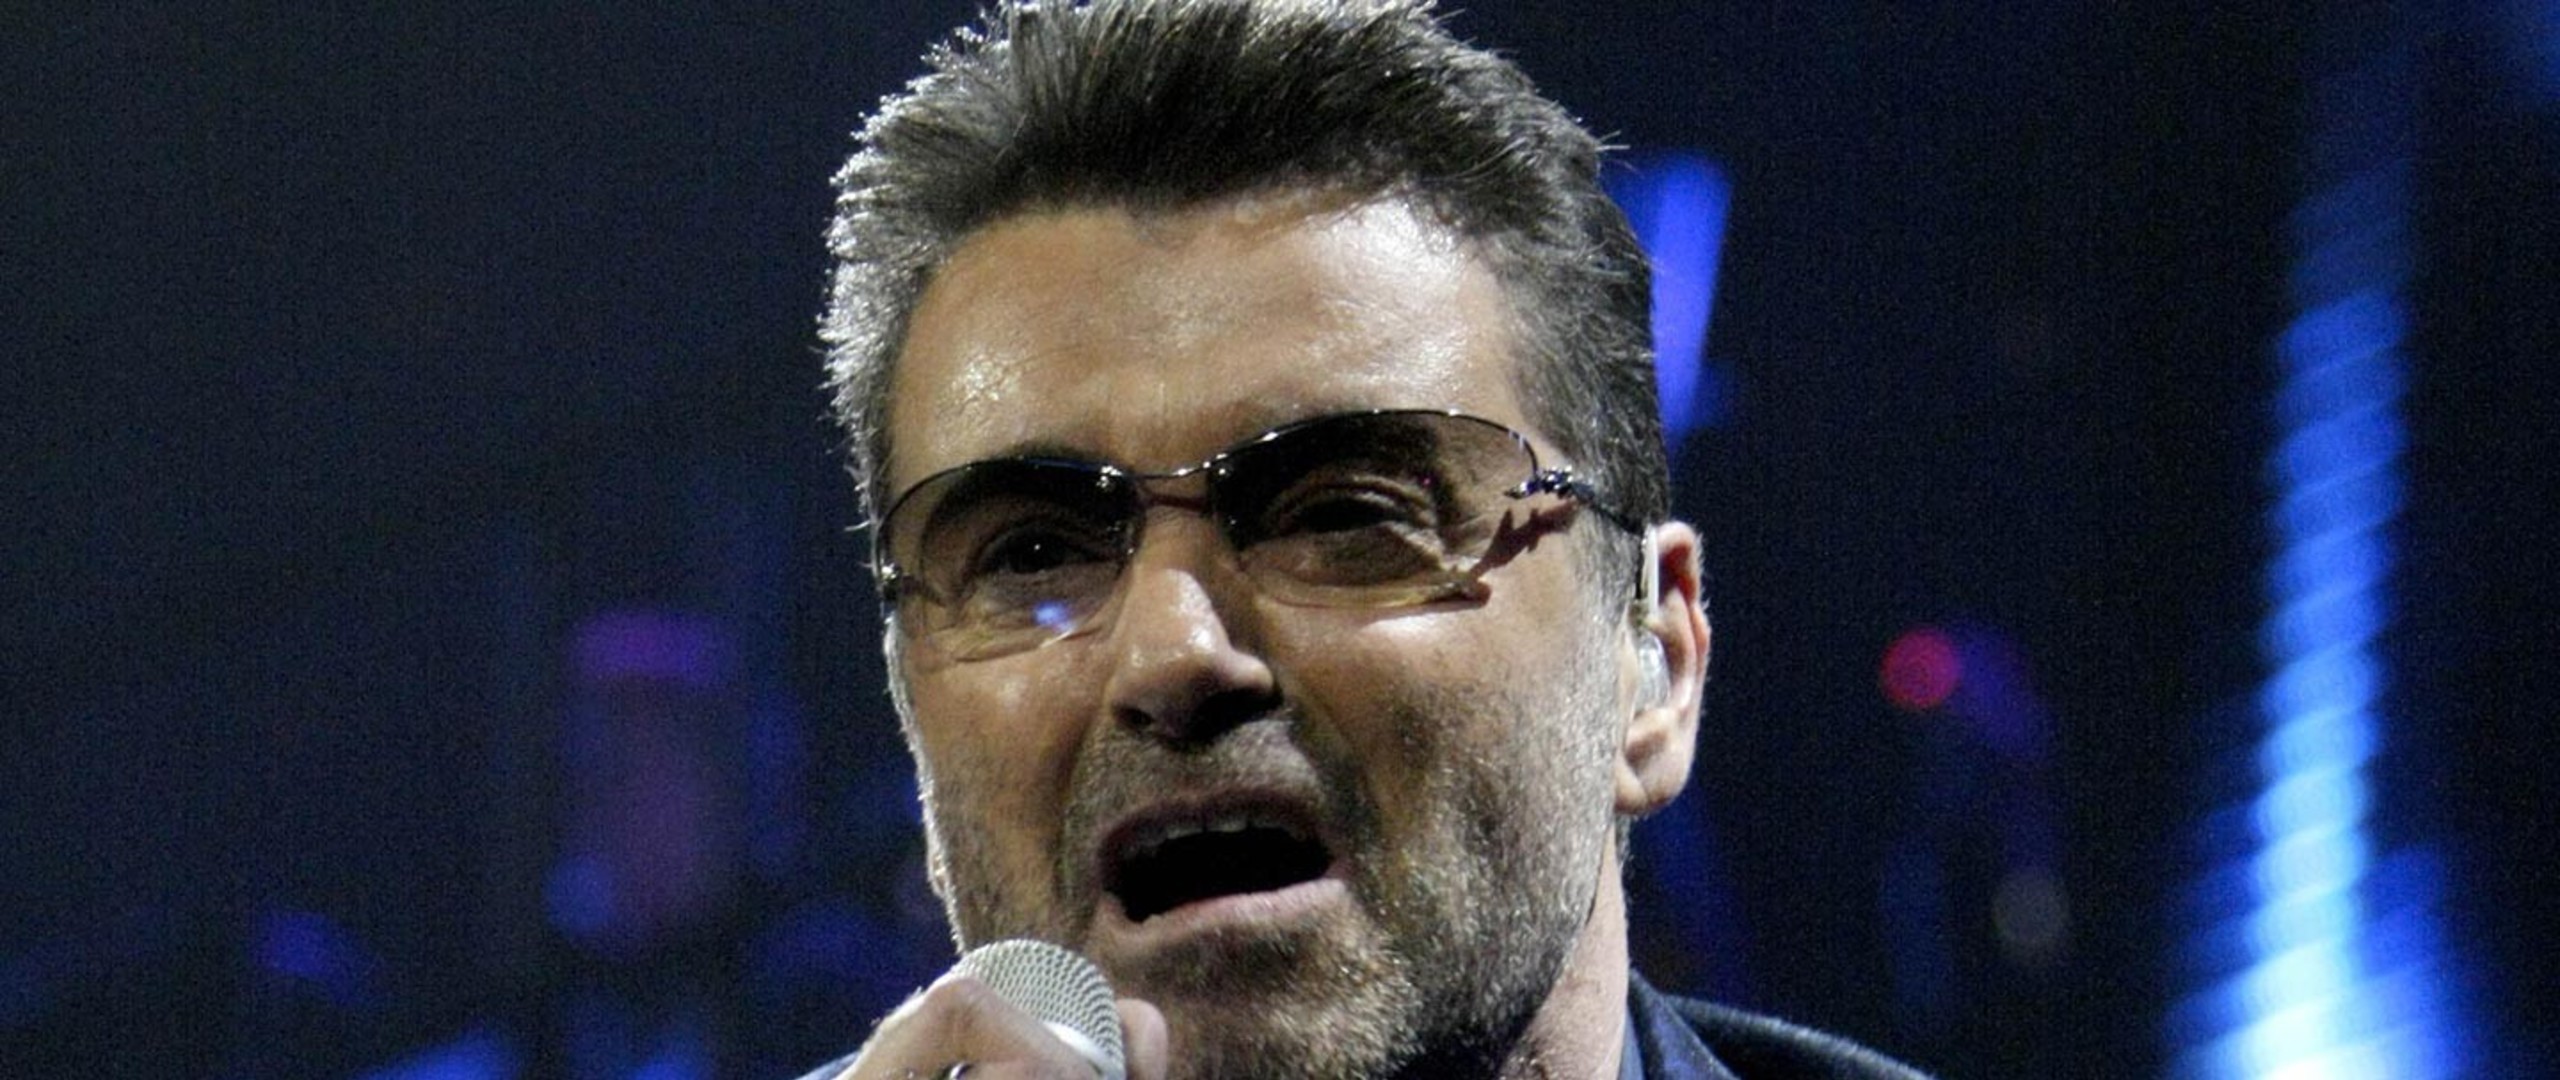 2560x1080 George Michael Wallpapers Images Photos Pictures Backgrounds